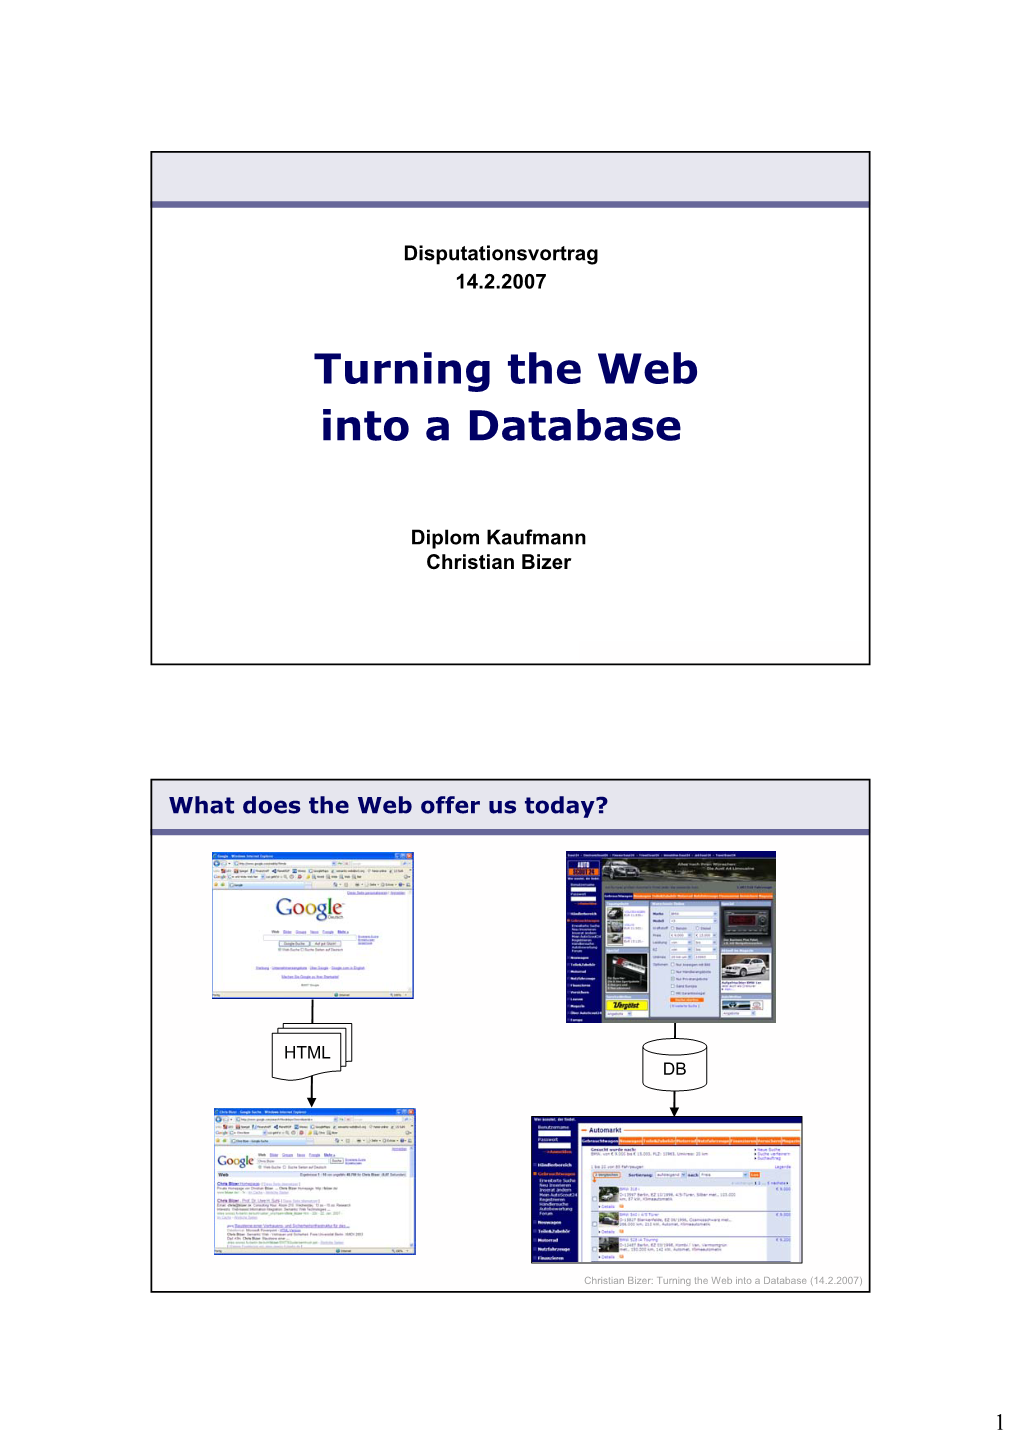 Turning the Web Into a Database